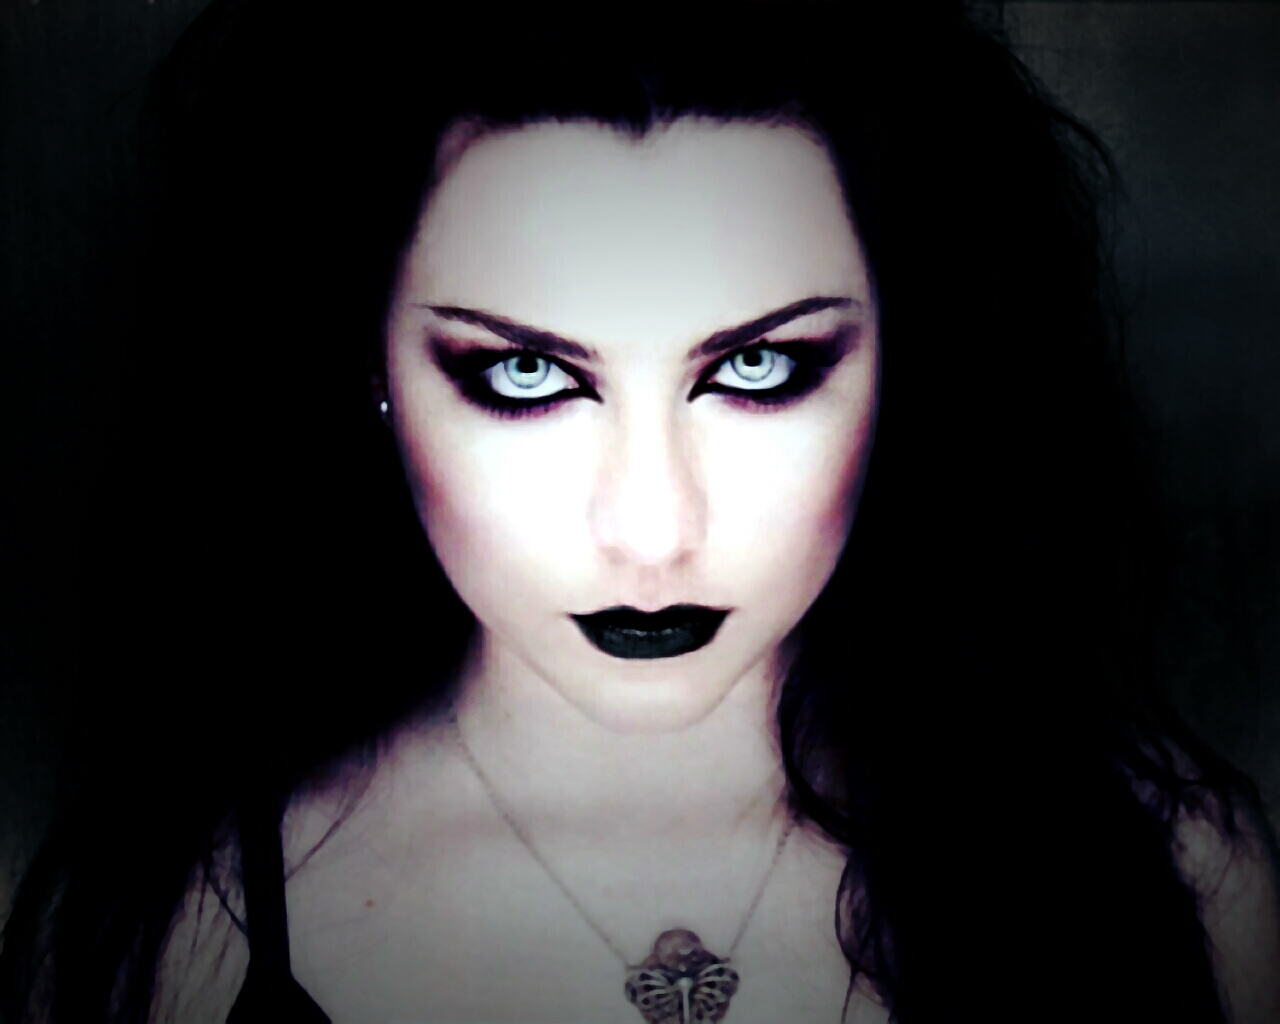 Evanescence Amy Lee